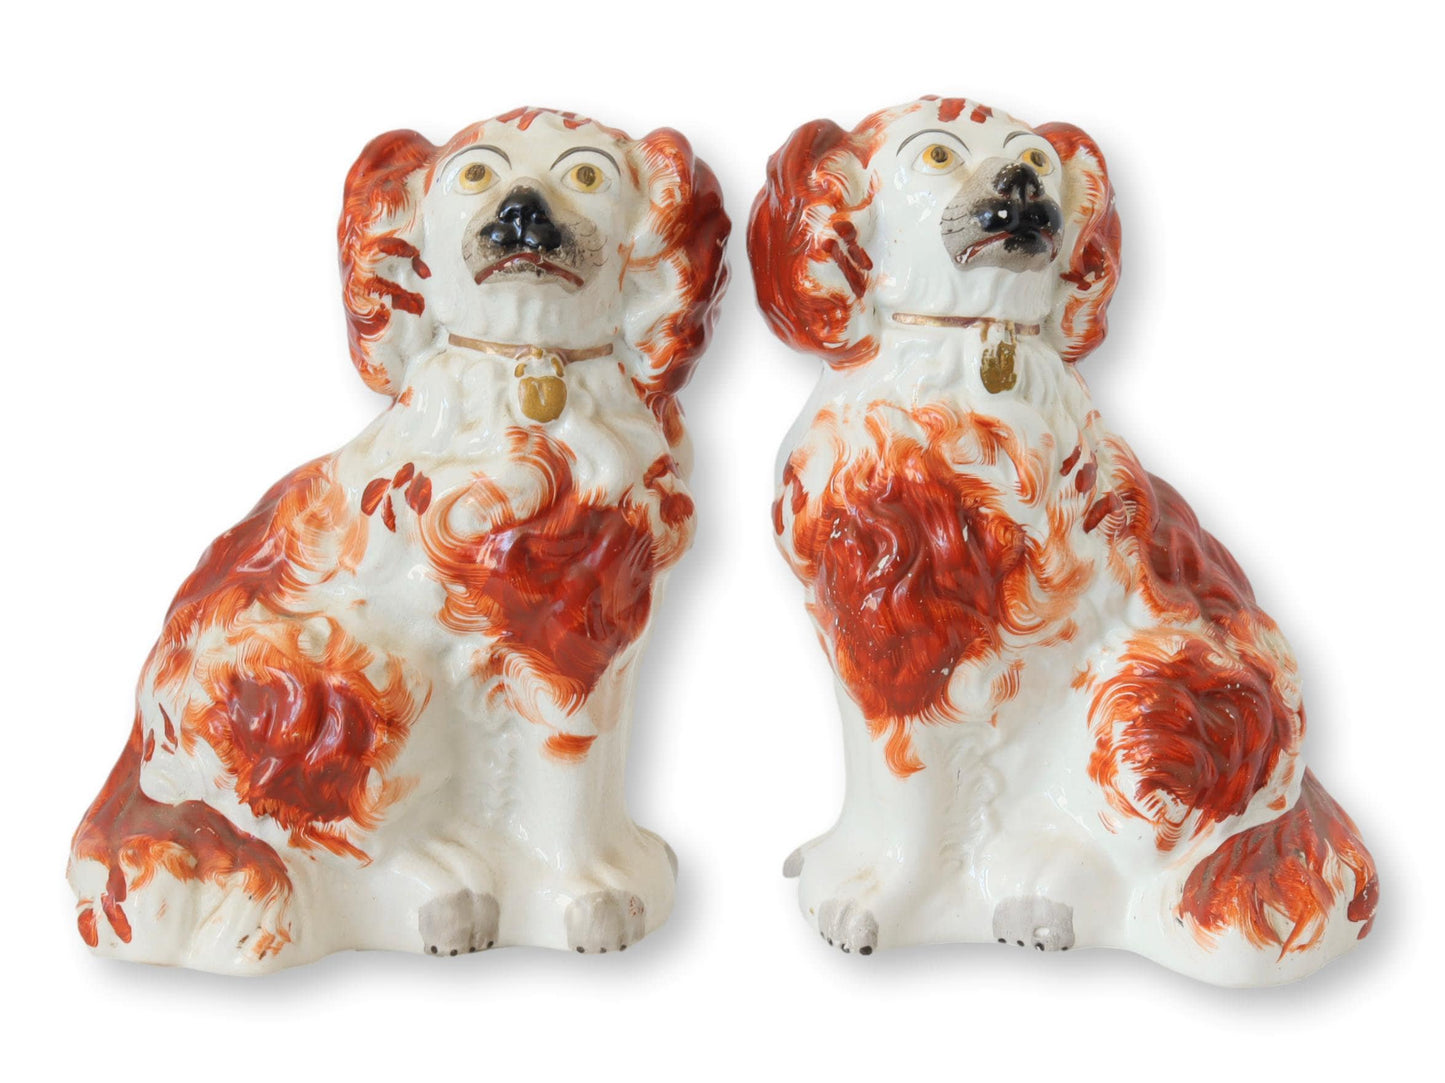 Antique English Staffordshire King Charles Spaniel Dogs | Russet Red